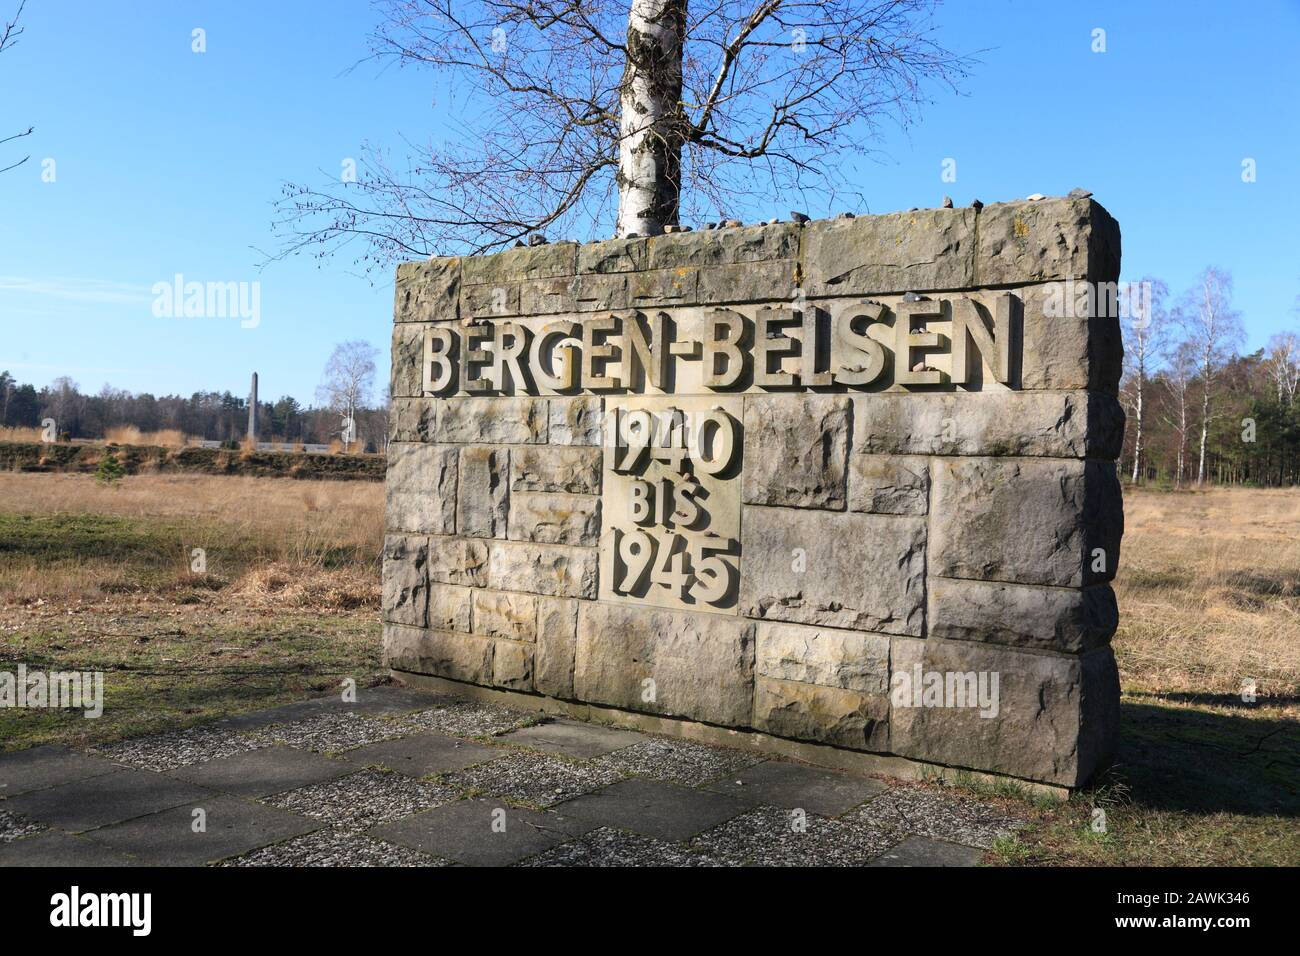 Bergen-Belsen concentration camp memorial, Lower Saxony, Germany, Europe Stock Photo